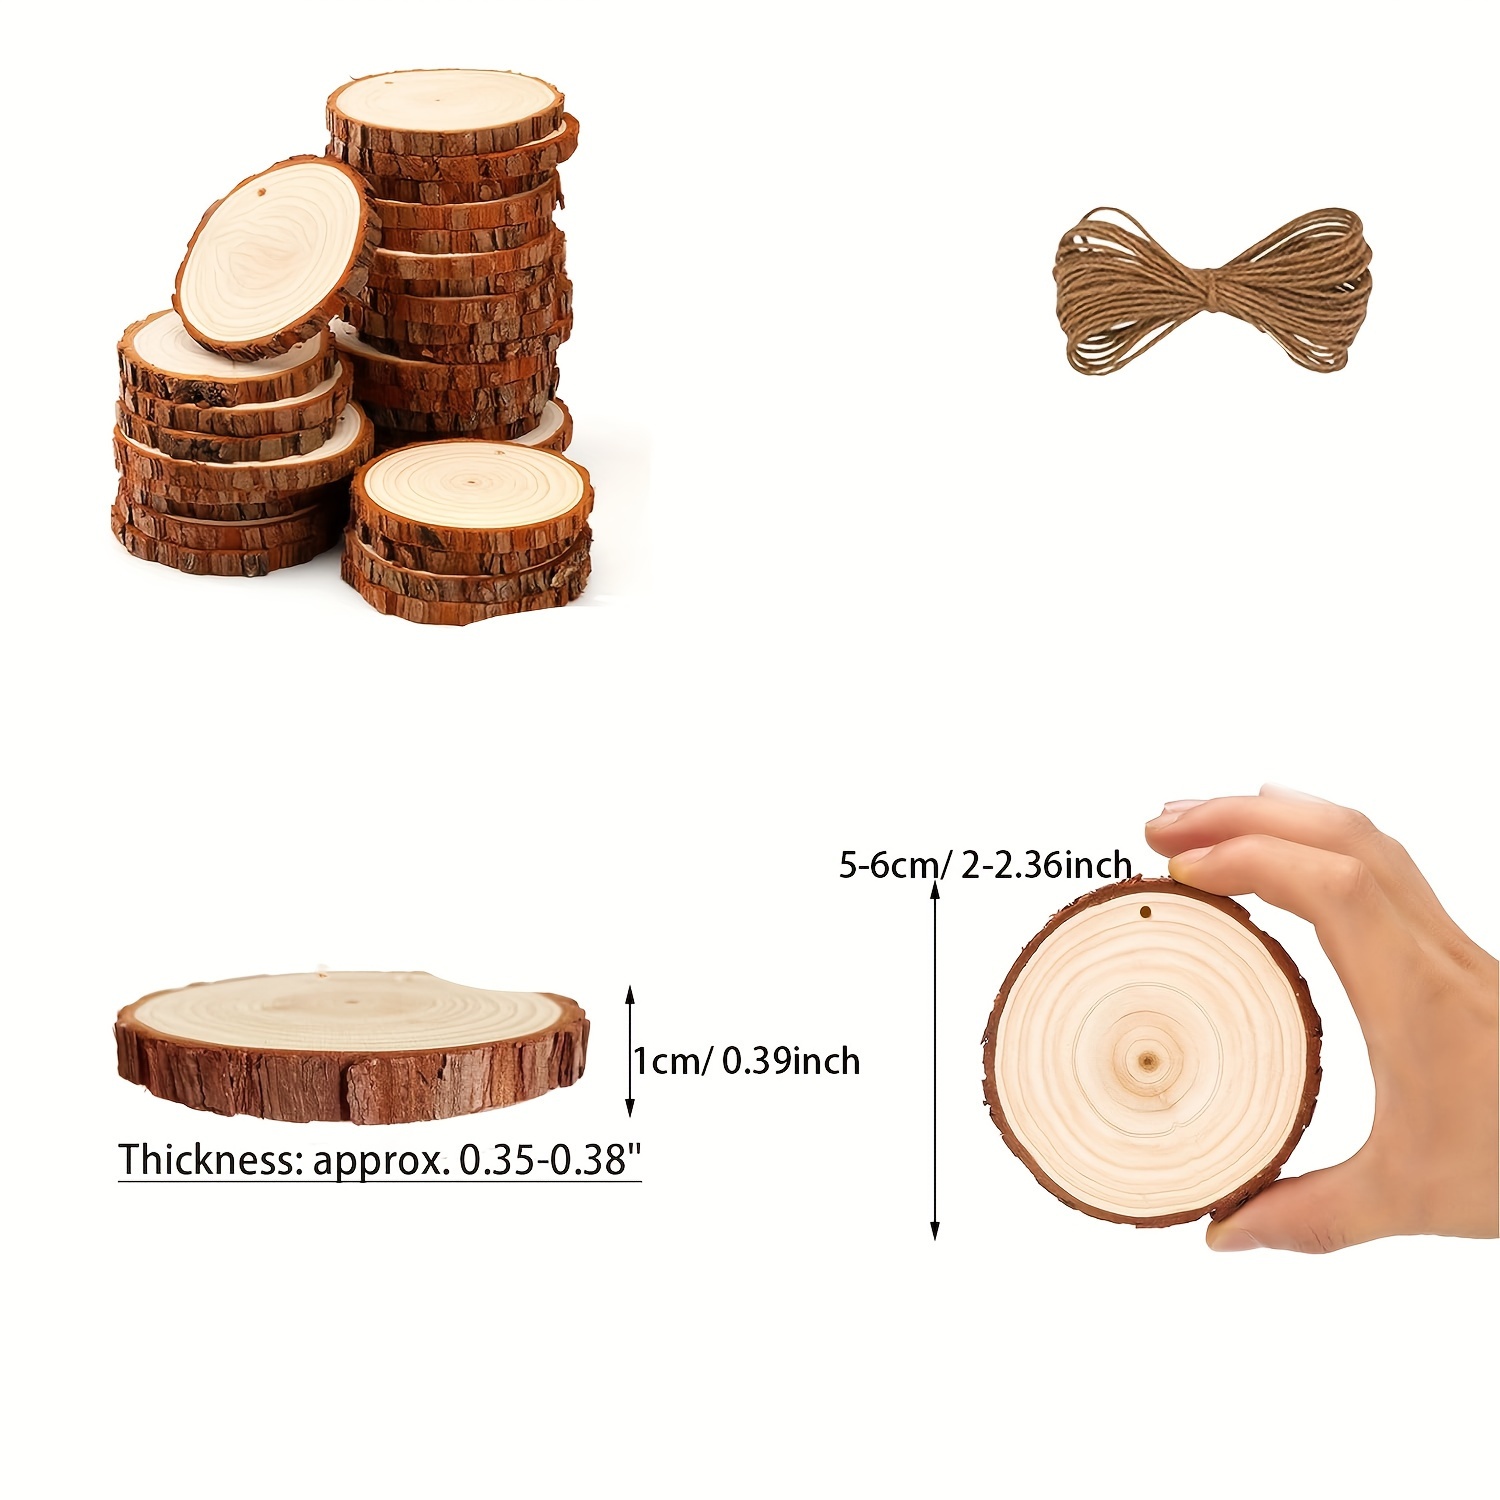 10PCS Natural Wood Pieces Round Unfinished Wooden Discs for Crafts